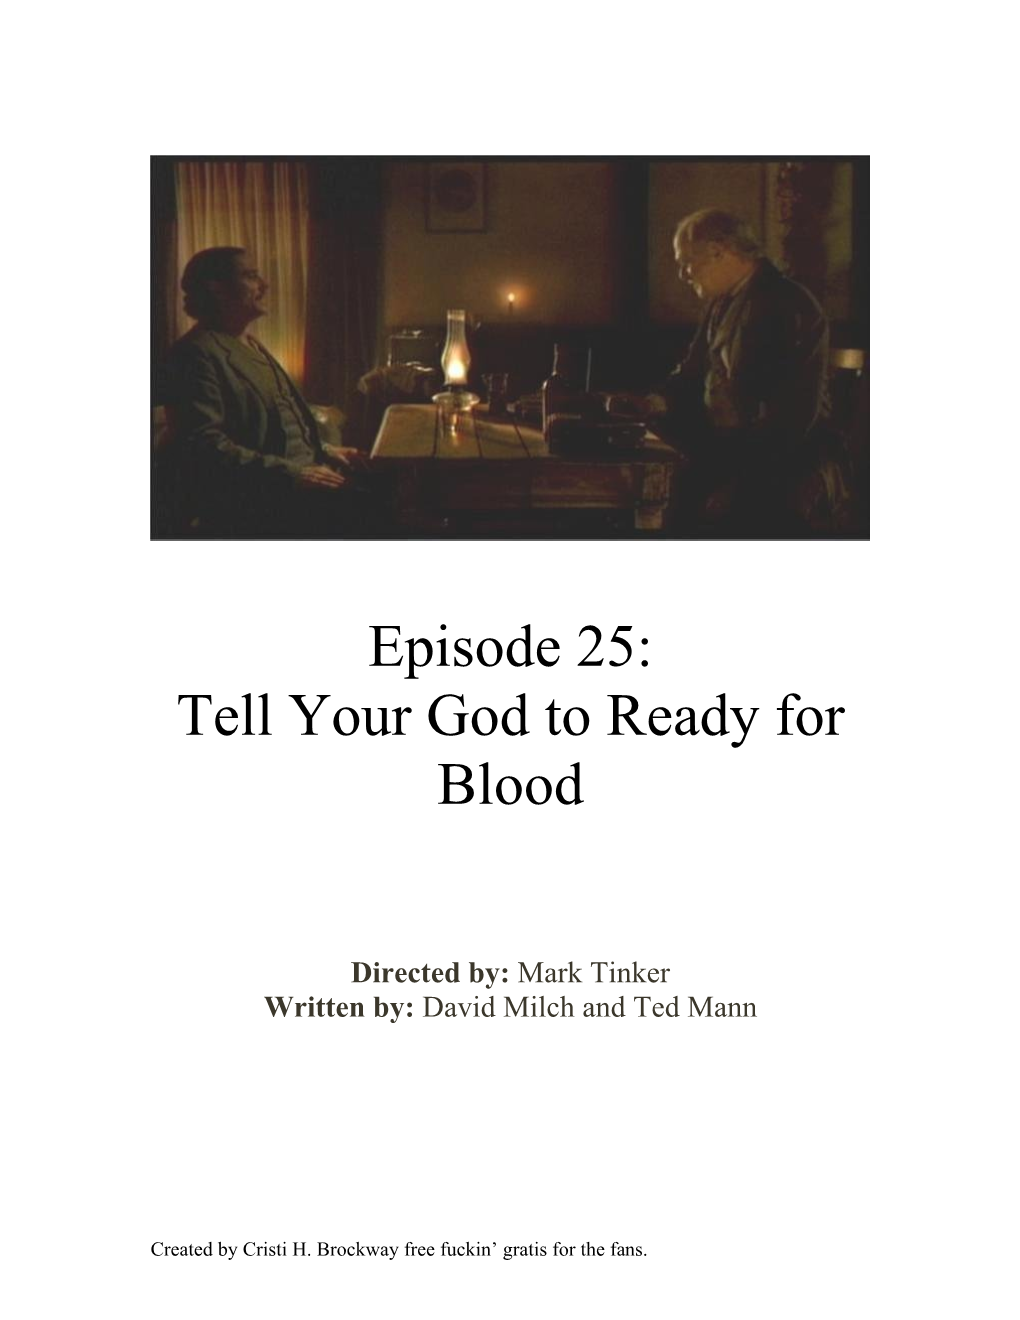 Episode 25: Tell Your God to Ready for Blood